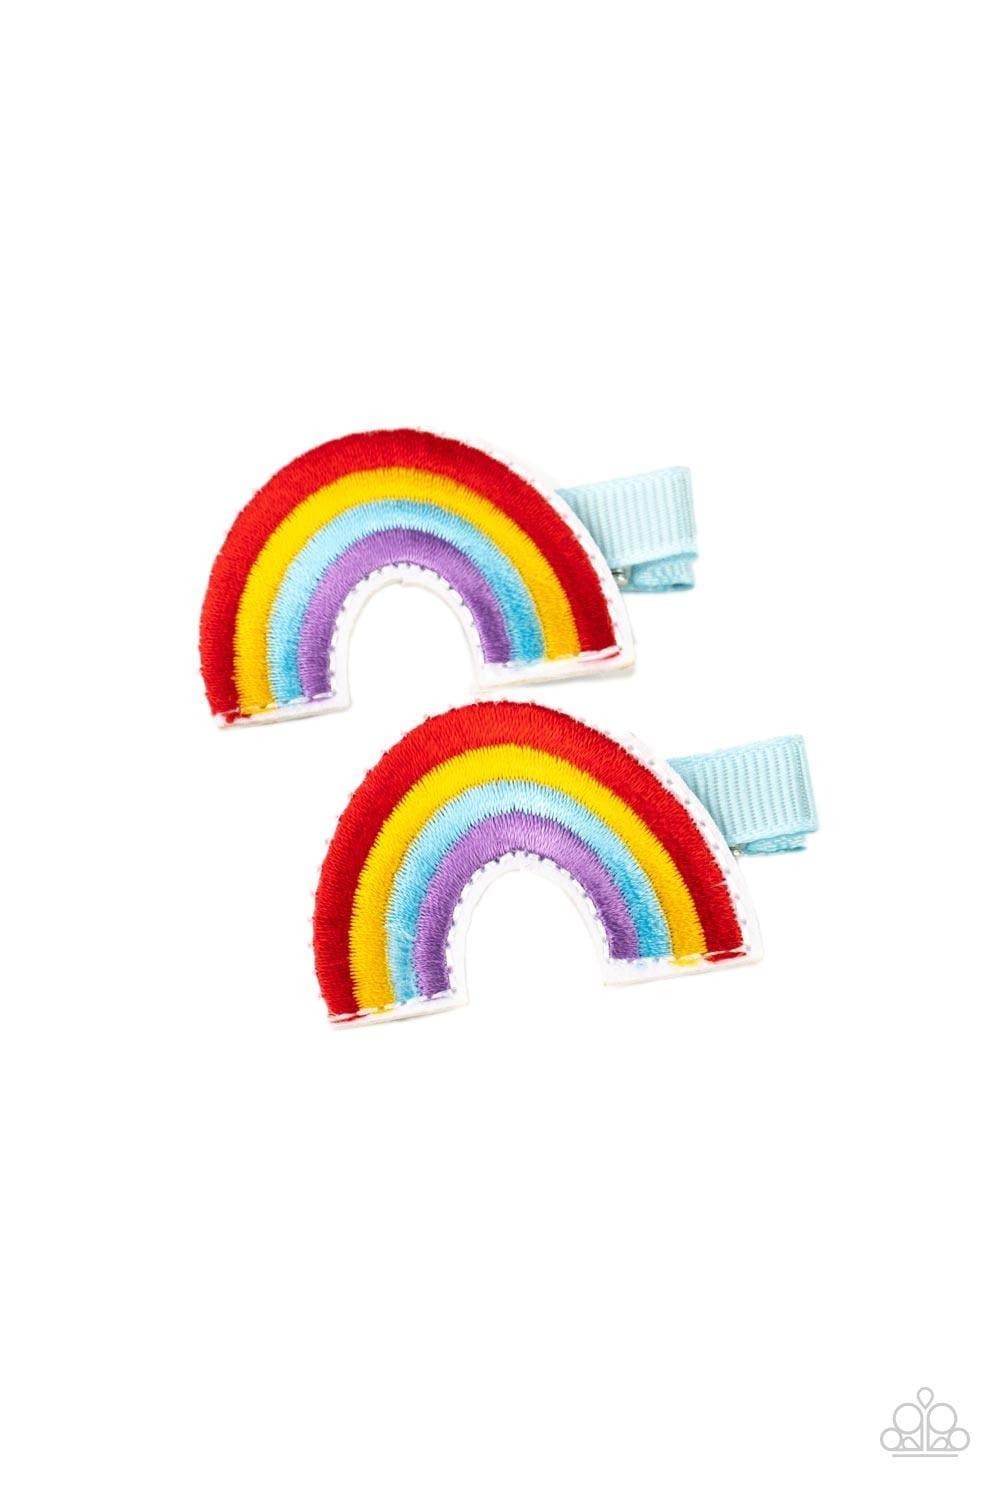 Paparazzi Accessories - Follow Your Rainbow - Multicolor Hair Clip - Bling by JessieK